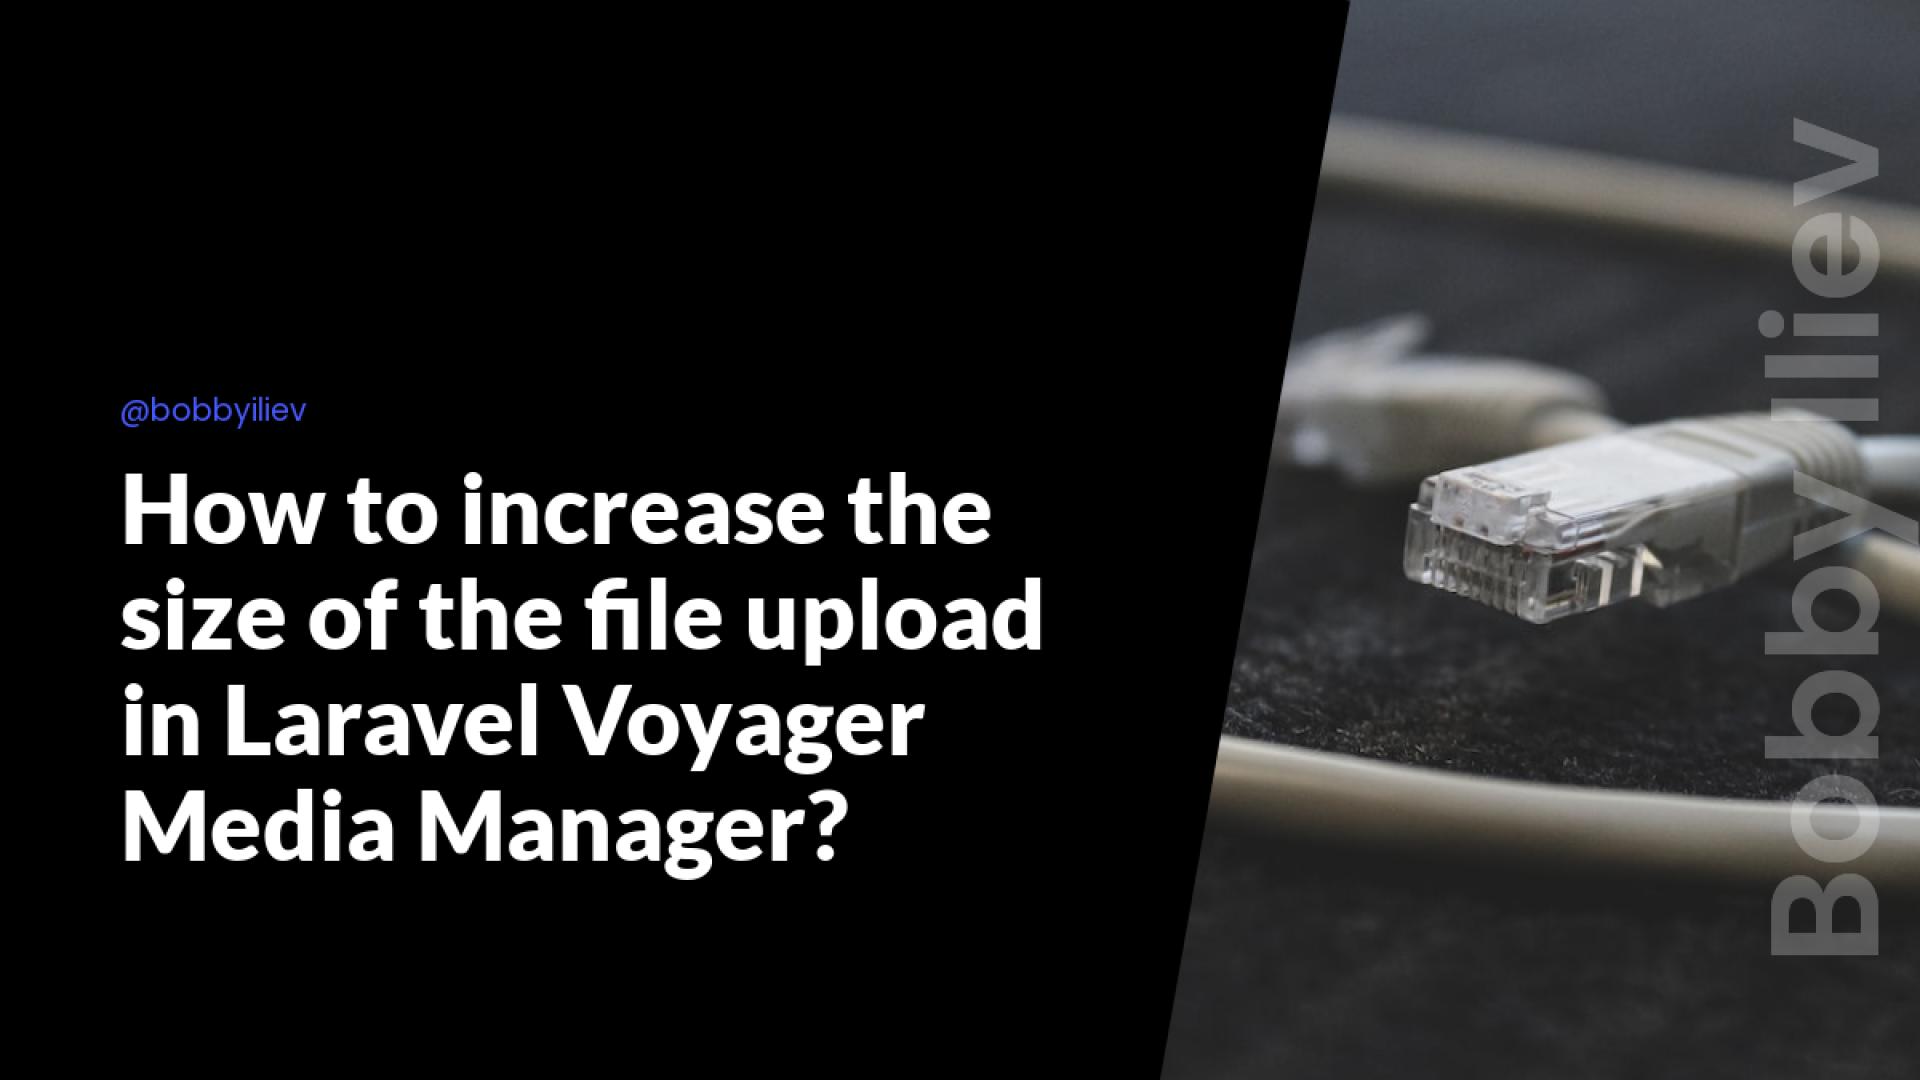 How to increase the size of the file upload in Laravel Voyager Media Manager?